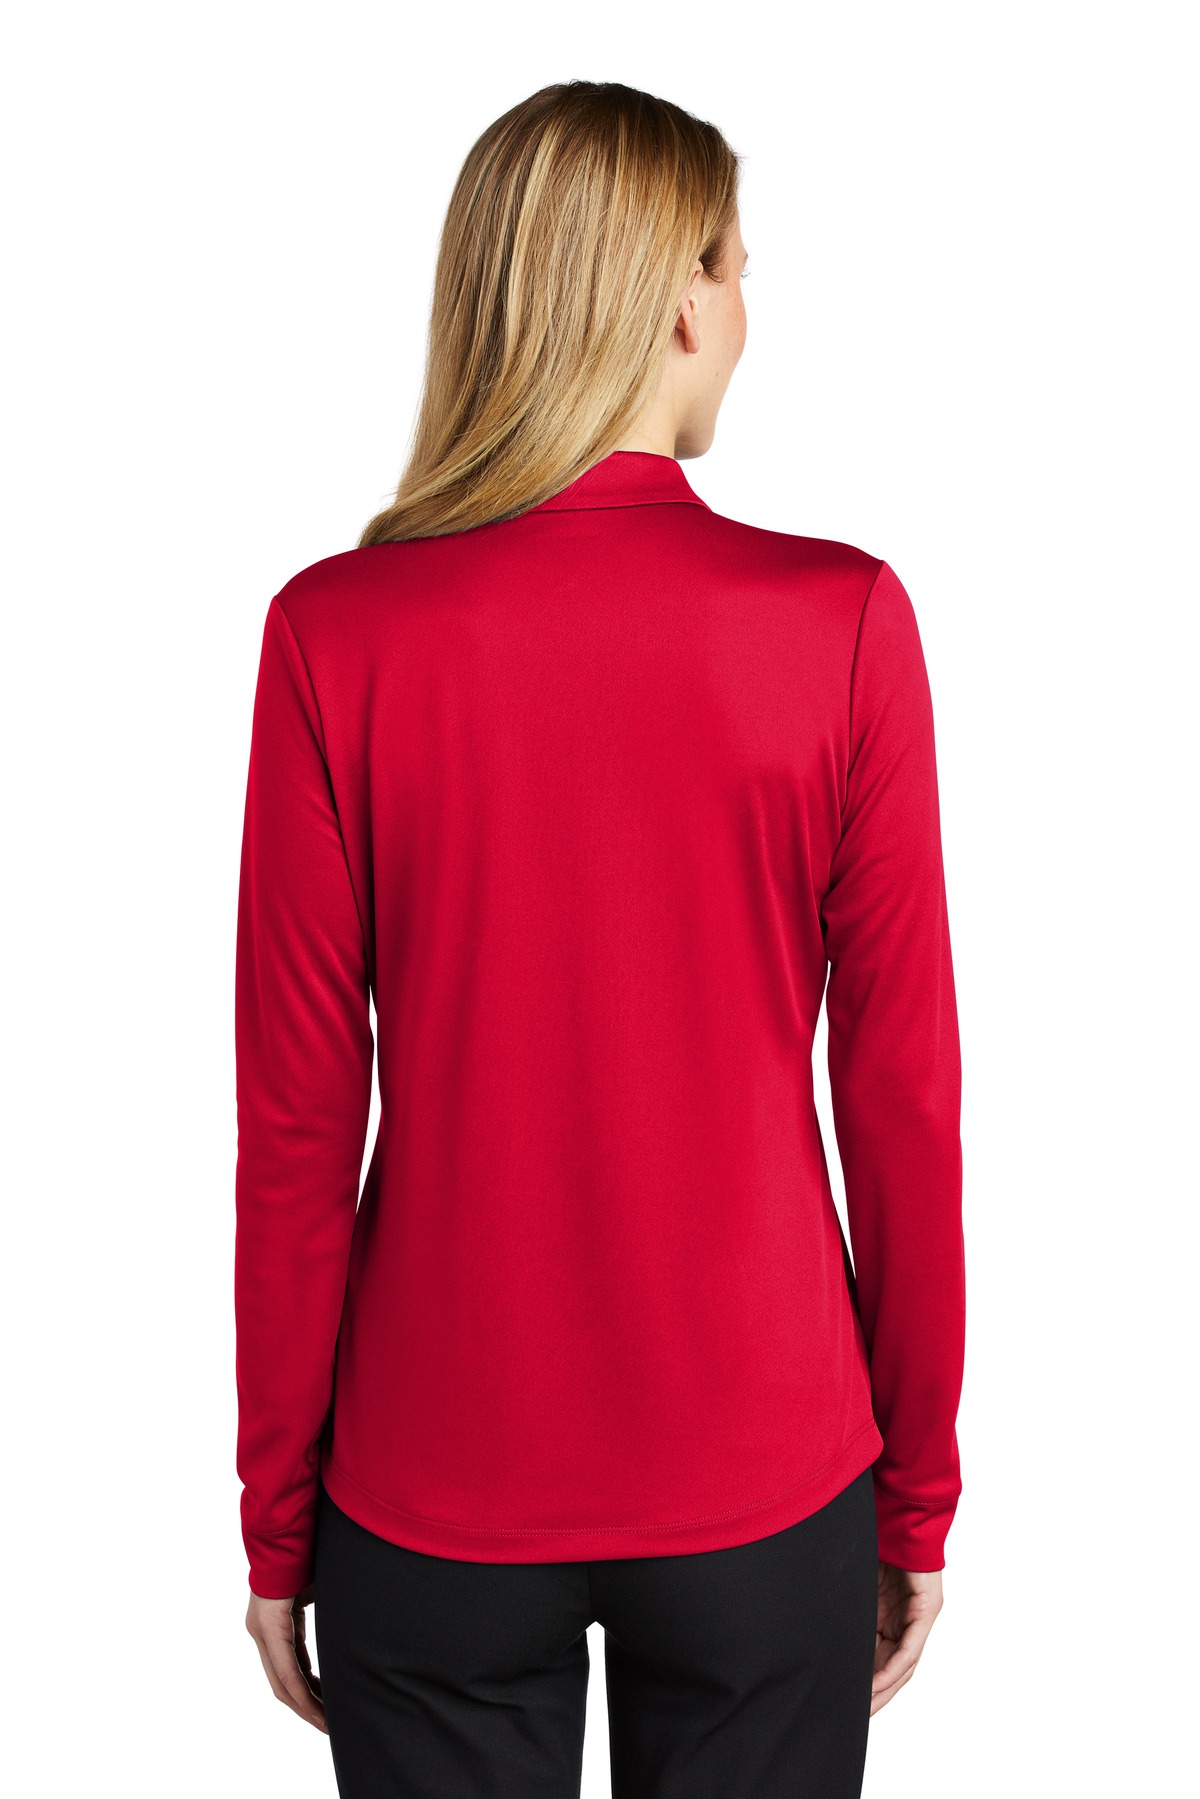 Port Authority Adult Female Women Y-neck Plain Long Sleeves Polo Red Medium - image 2 of 4